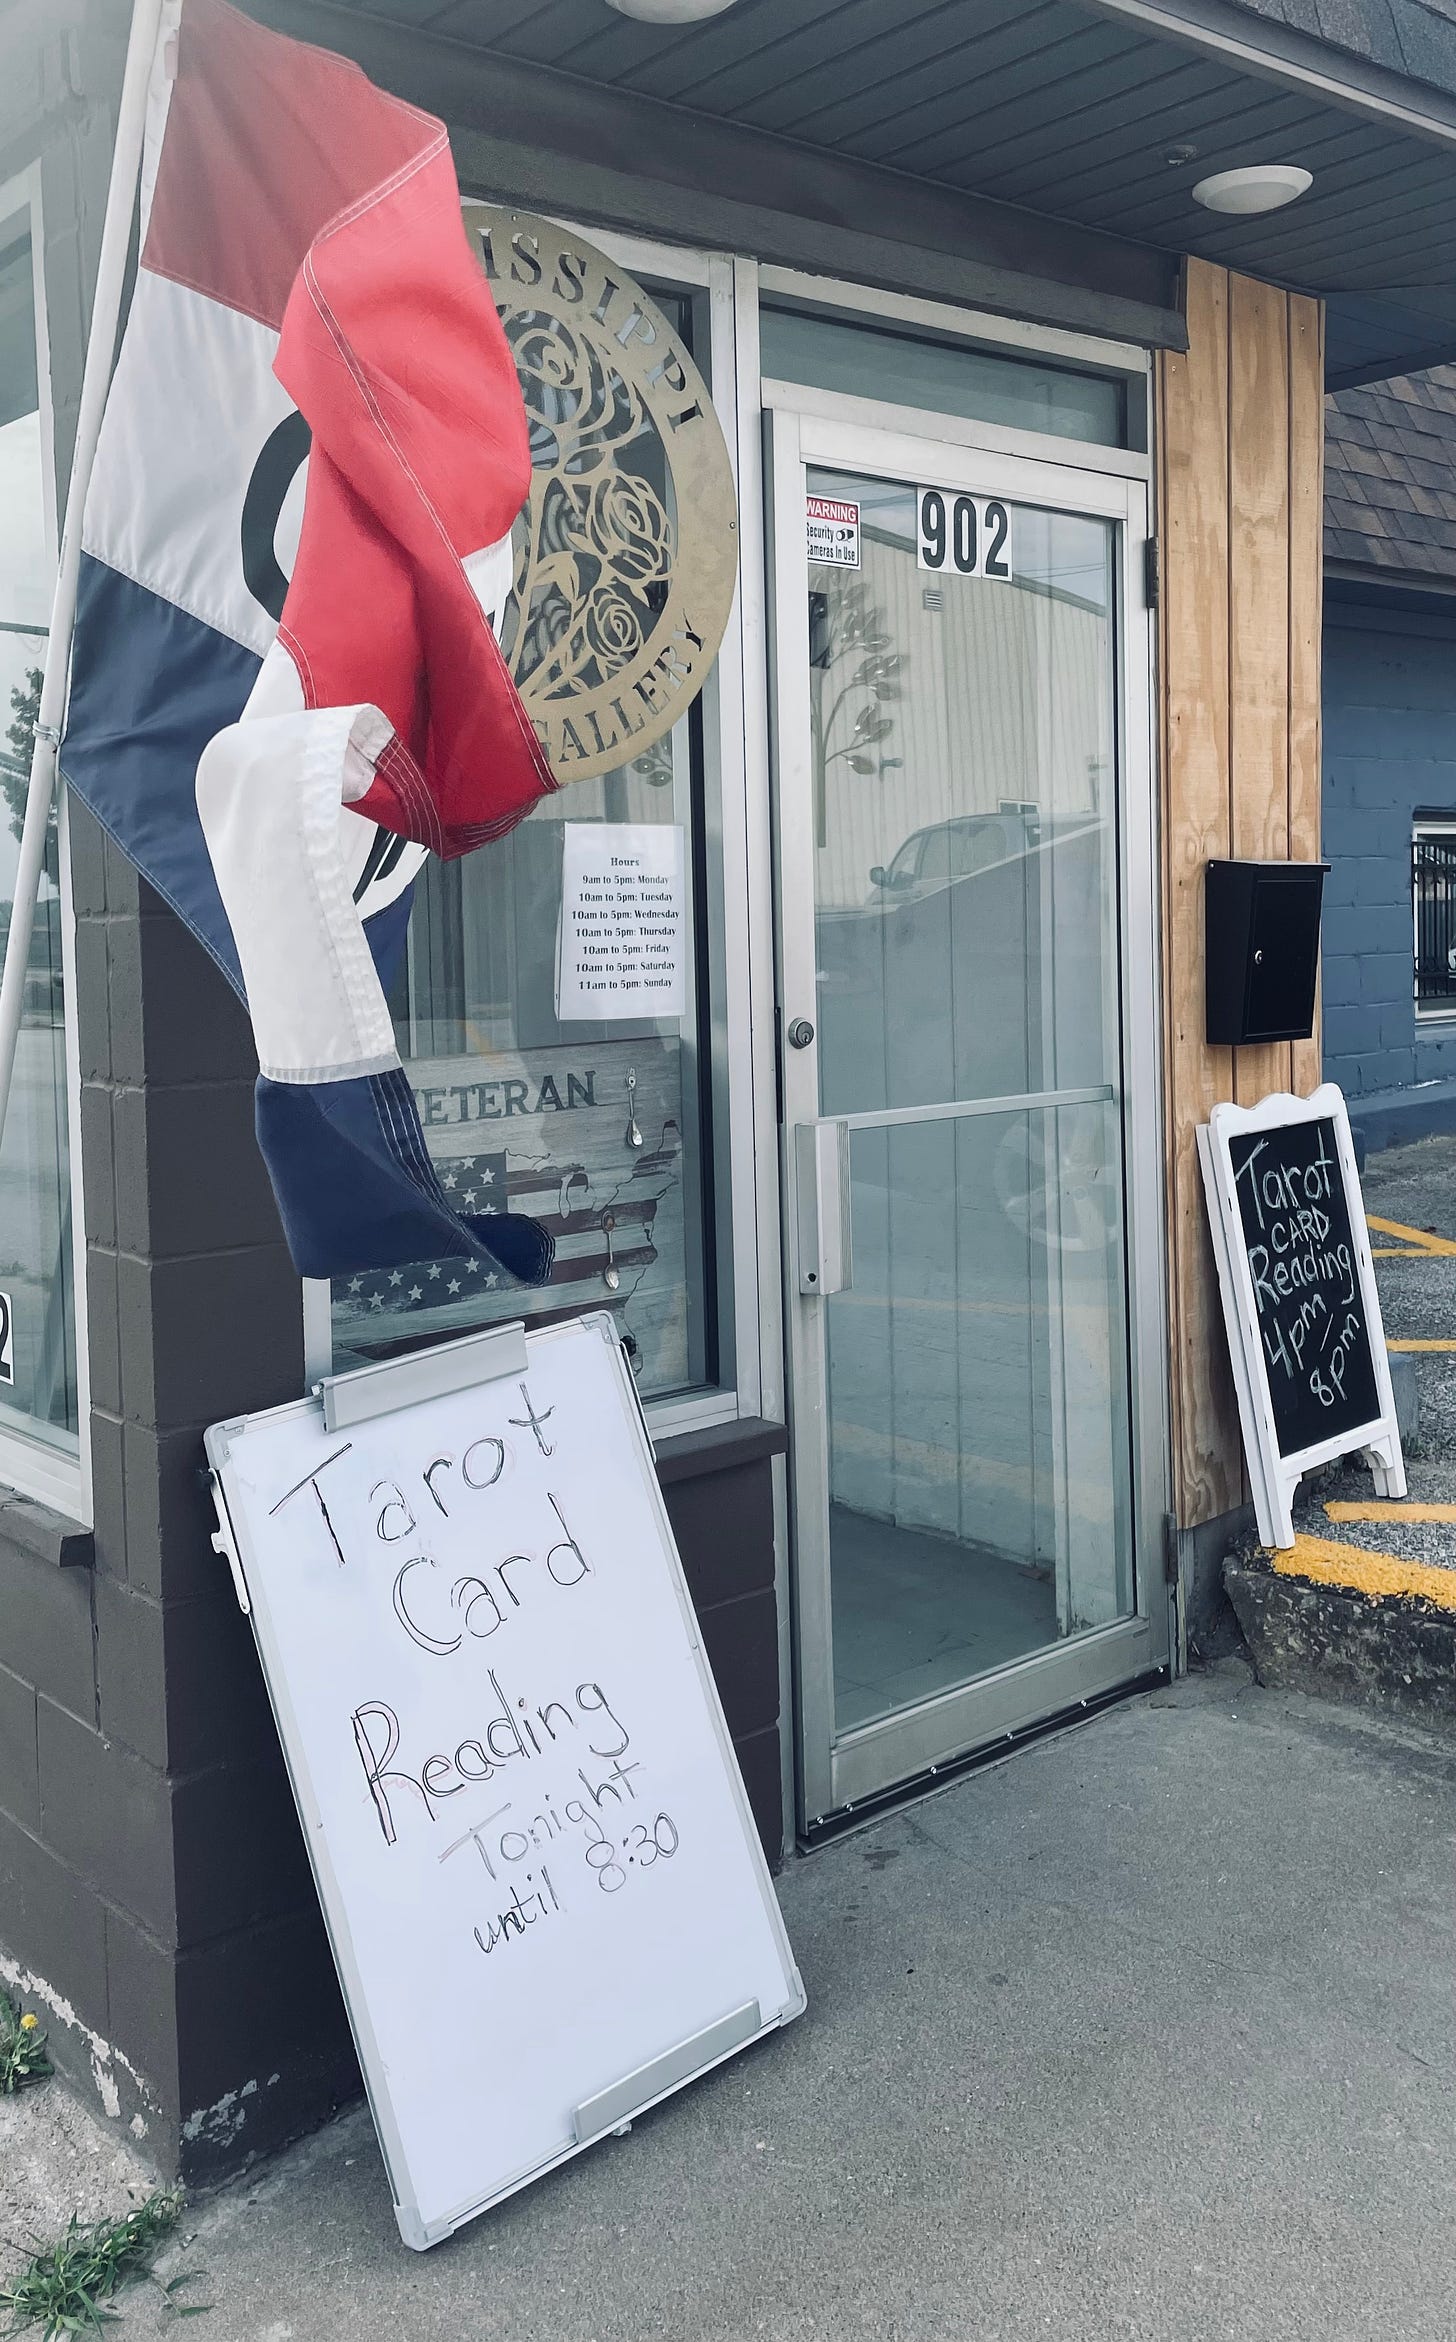 A red, white and blue flag with the word "Open" waves in the wind outside a business door, where there are also two signs advertising tarot card readings happening inside.